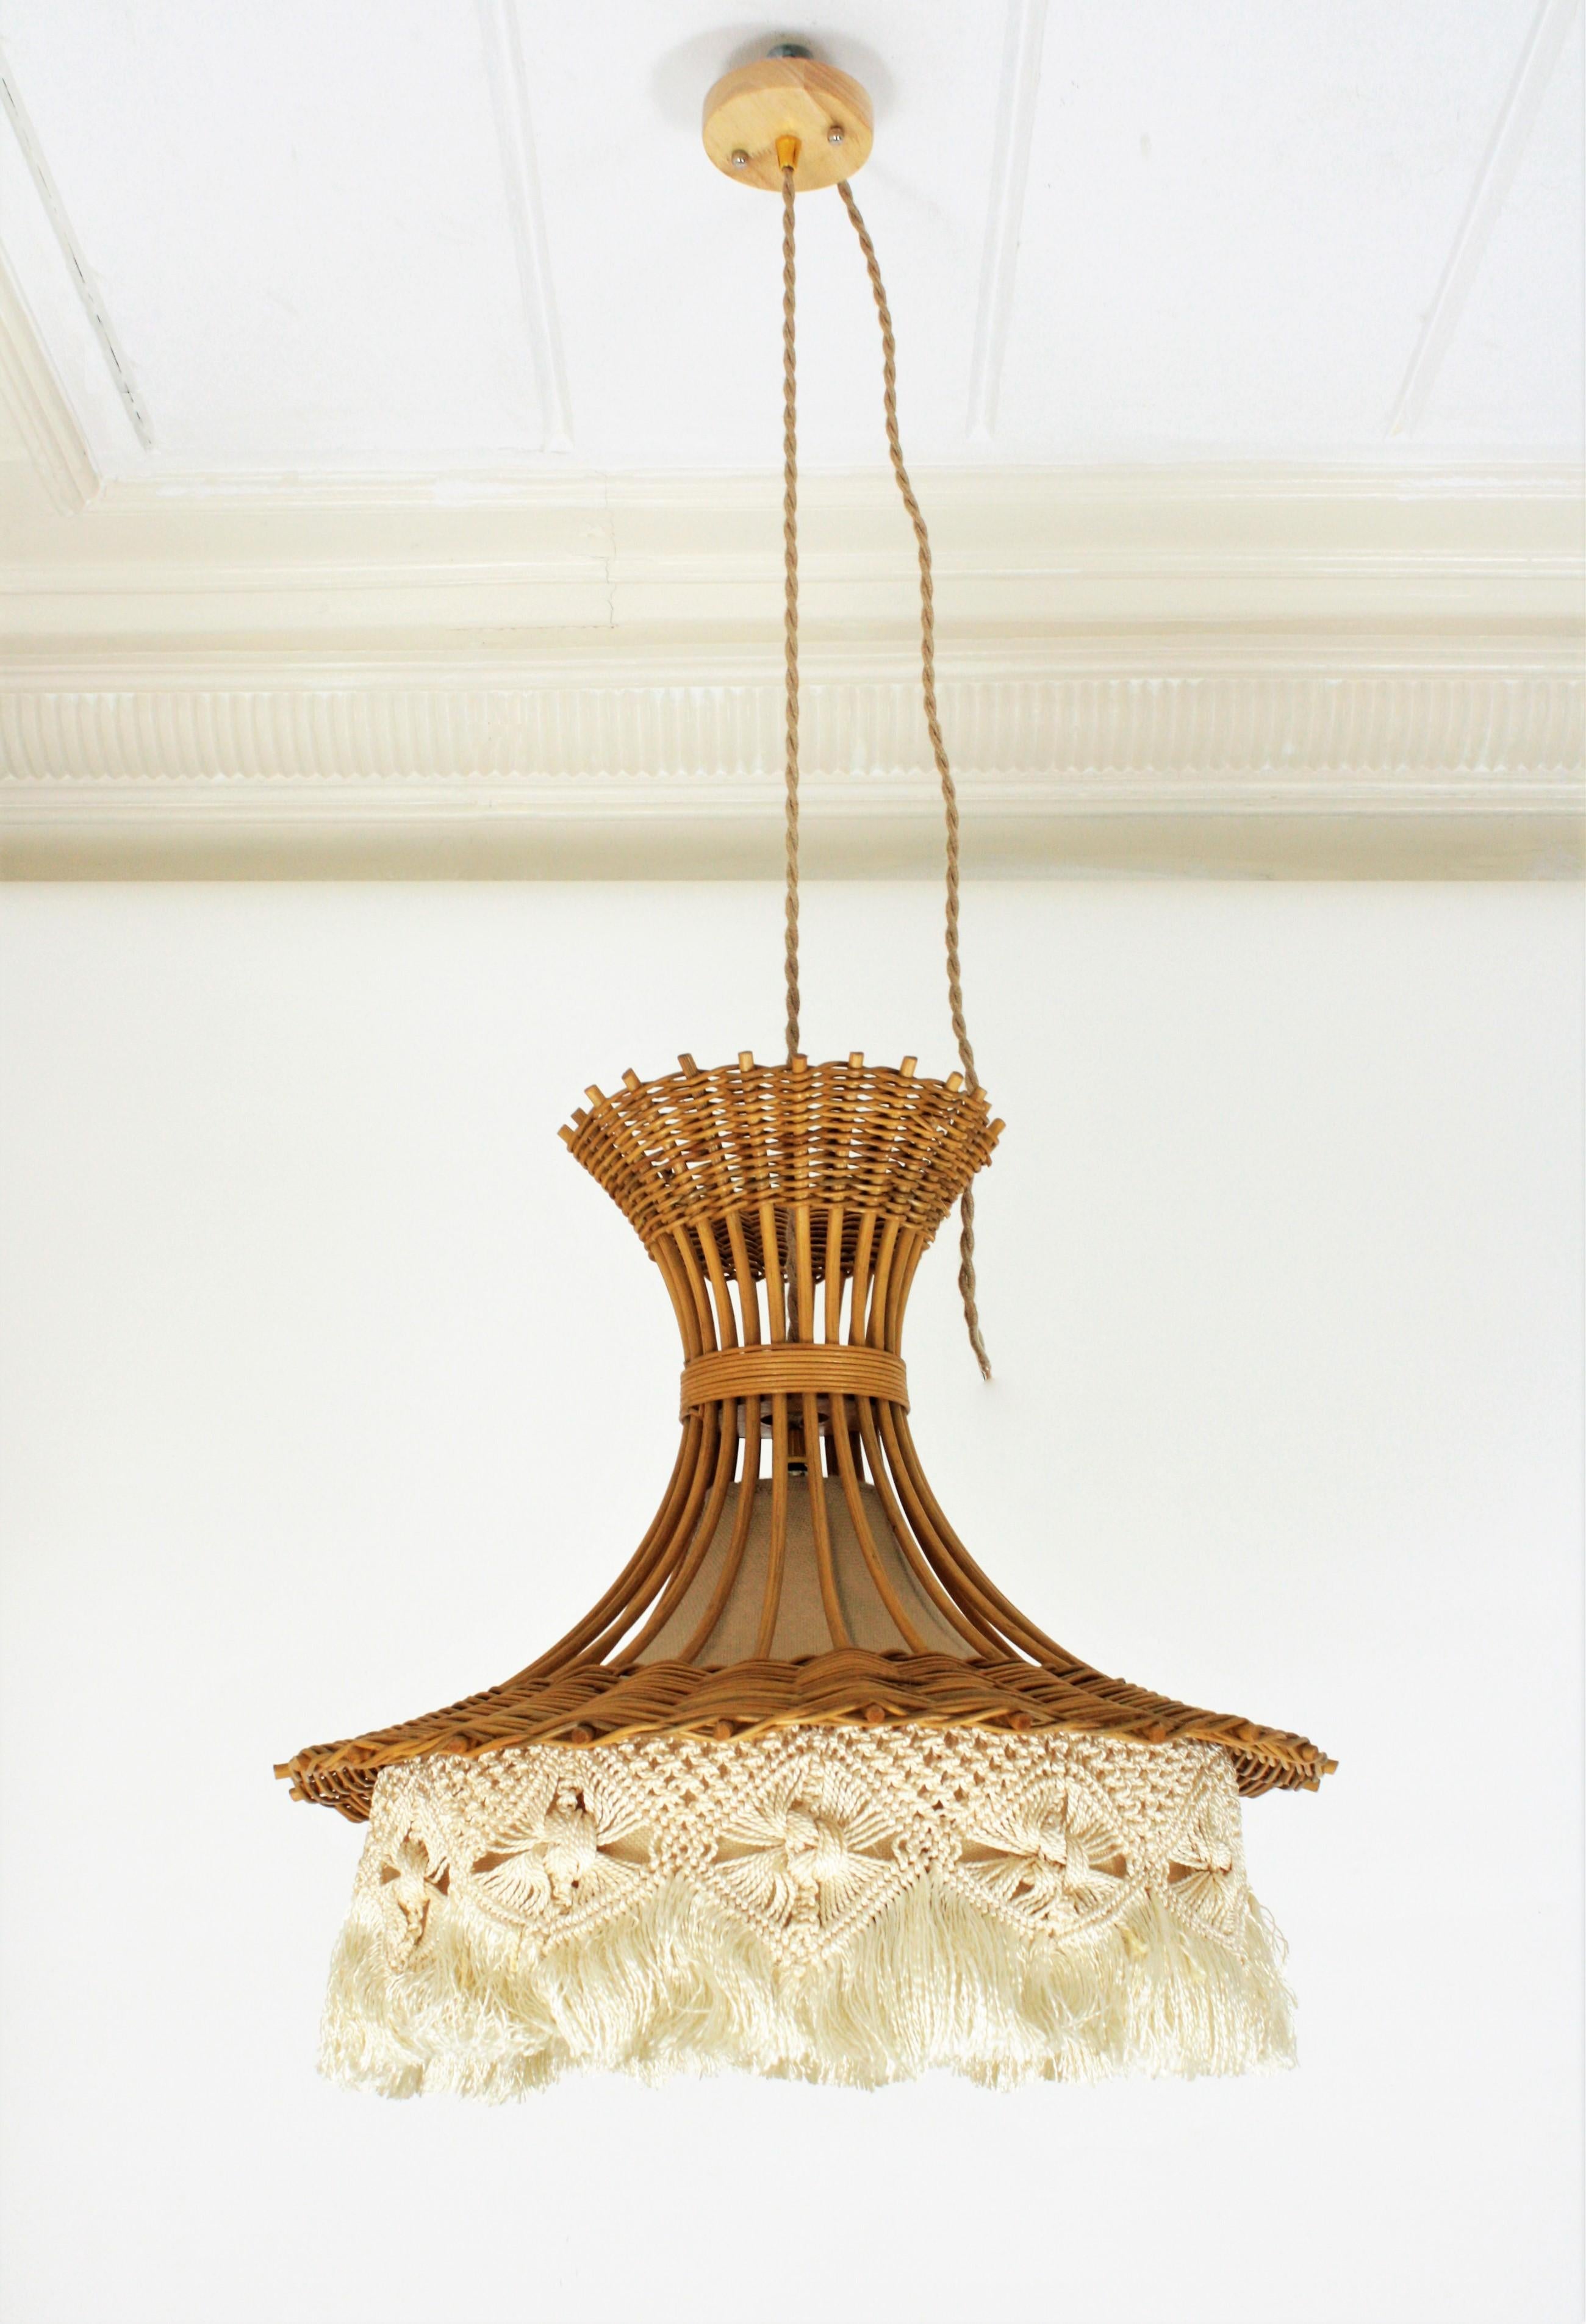 Cord French Rattan and Macrame Large Pendant Lamp / Hanging Light with Fringe